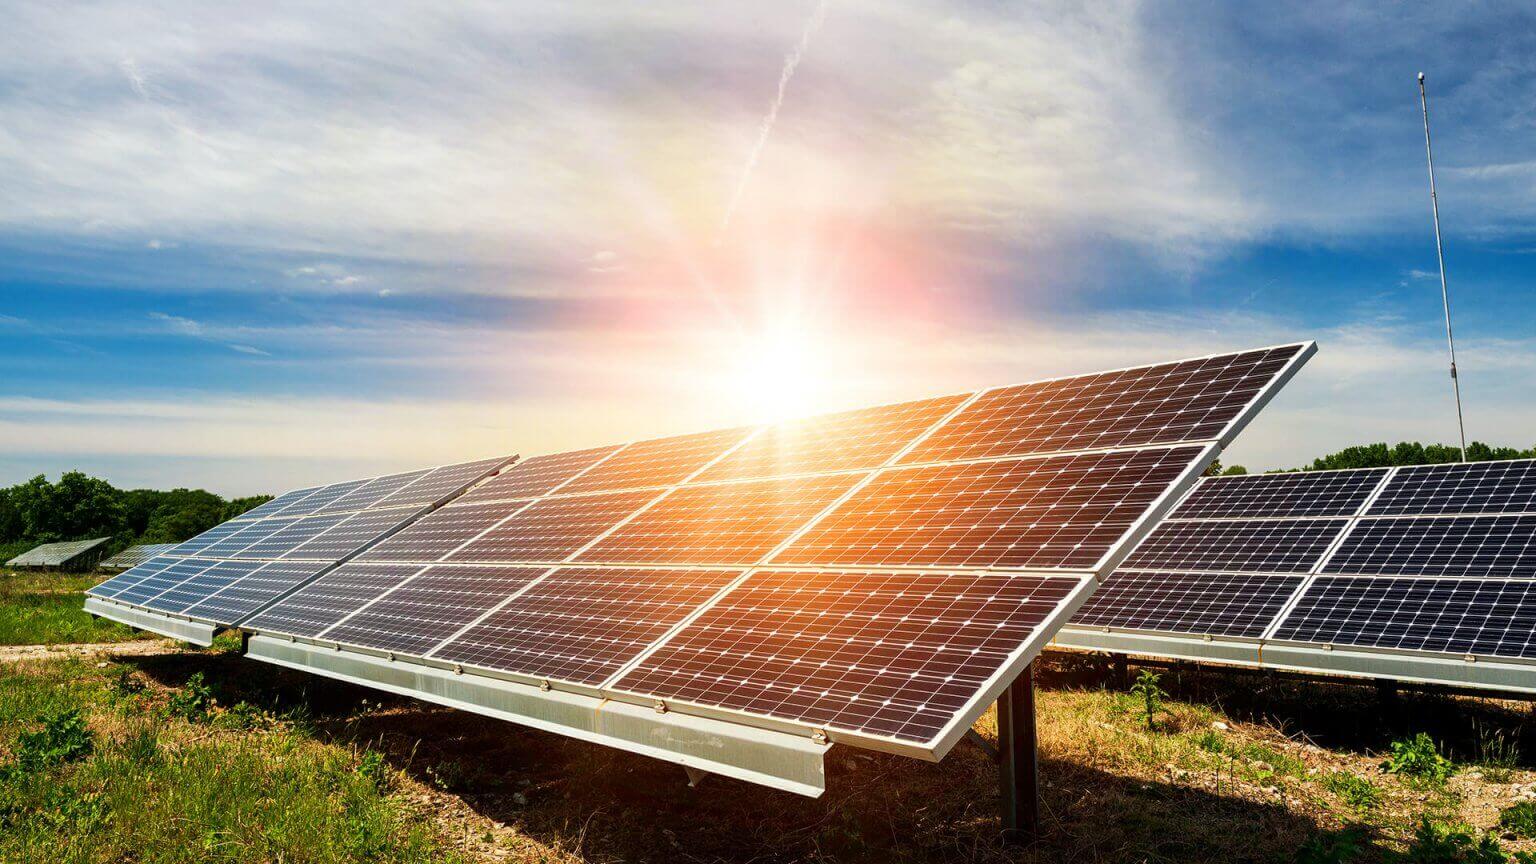 licensing Processes Of Solar Power Plants (spp) In The Electricity Market Of Turkey, Turkey Law Firm